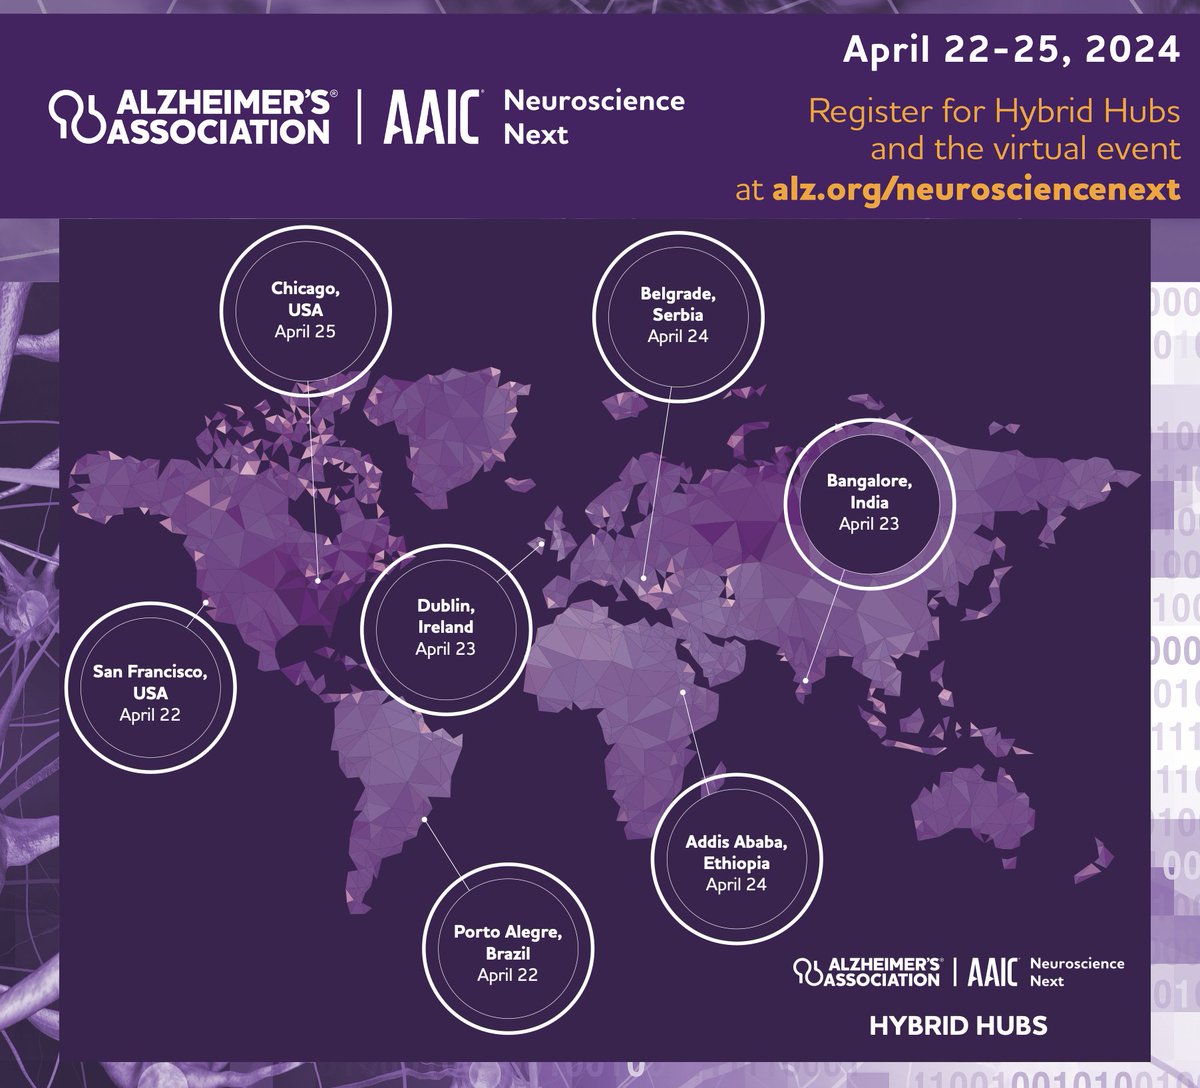 Join us at the #AAIC #NeuroscienceNext in Ireland in person (travel grants available) or online 👉 shorturl.at/lKR34🍀. Looking forward to expanding global brain health & dementia research via computational neuroscience, research for policy, women's brain health, and more!